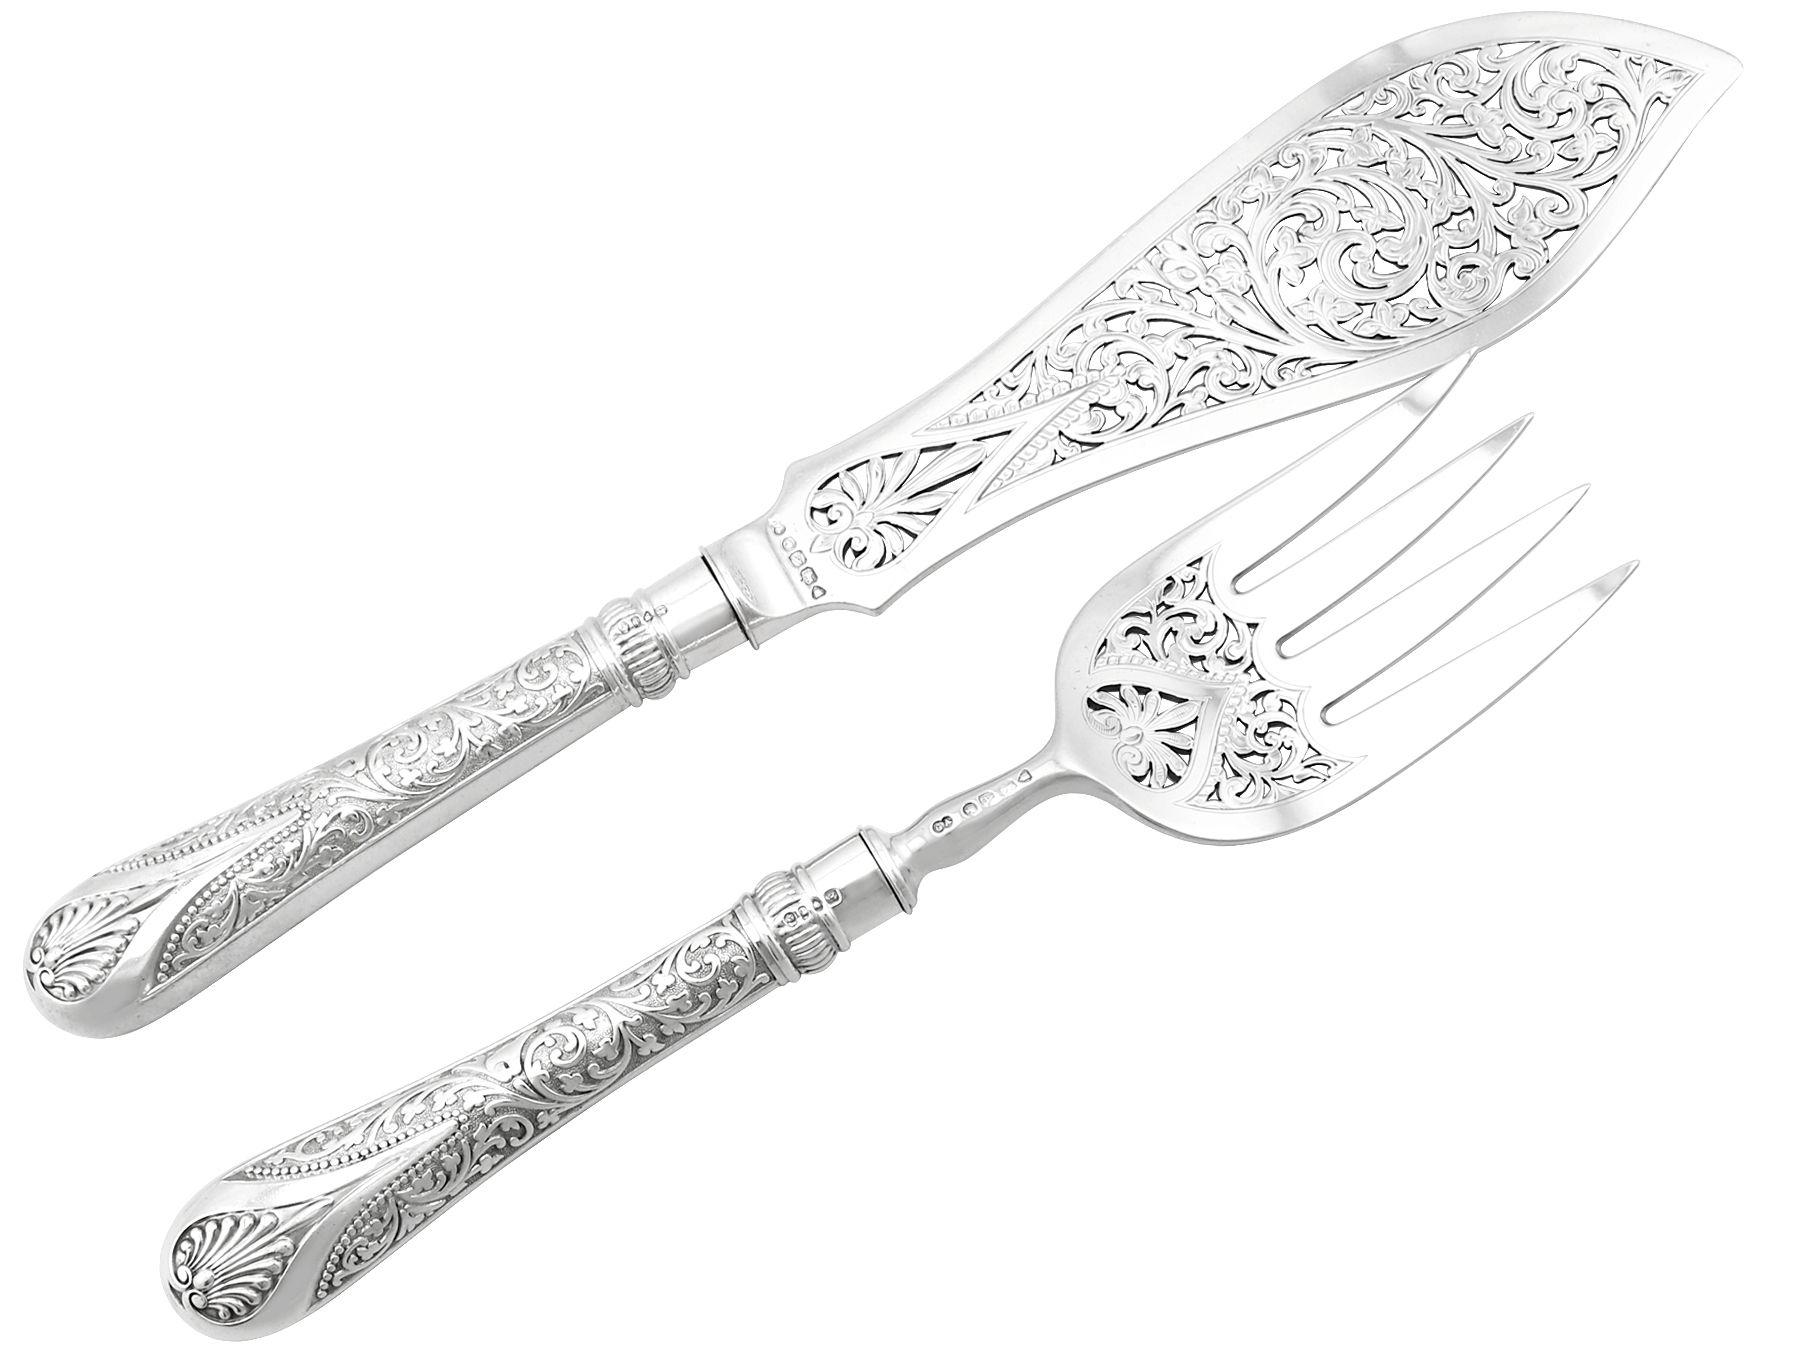 An exceptional, fine and impressive pair of antique Victorian English sterling silver Newton pattern fish servers - boxed; an addition to our silver flatware collection.

This exceptional pair of antique Victorian sterling silver fish servers